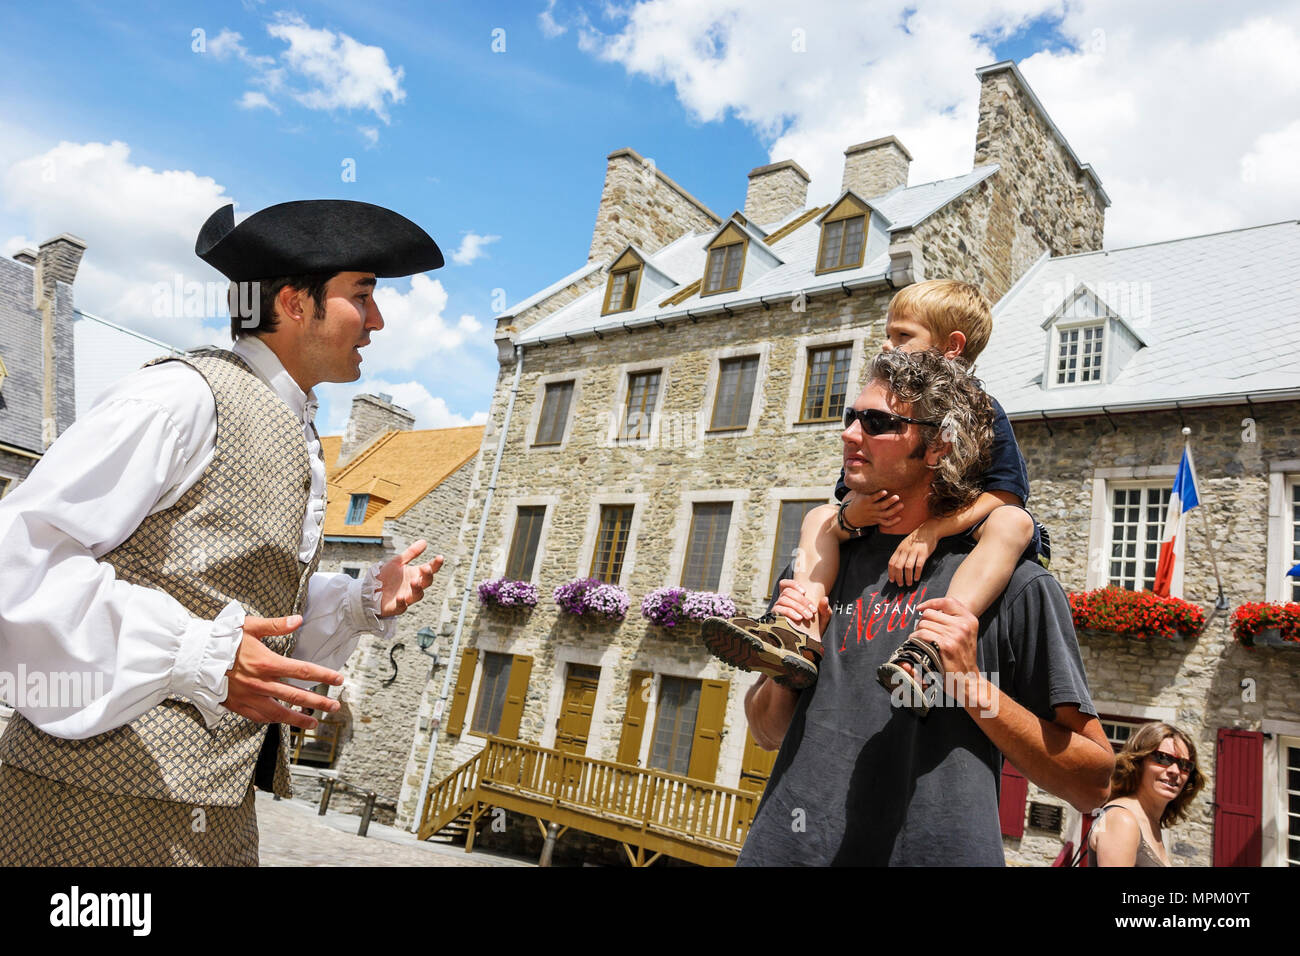 Quebec Canada,Lower Town,Place Royal,reenactor,reenact,role play,act,costume,actor,colonial costume,father,parent parents,son,historic buildings,city Stock Photo